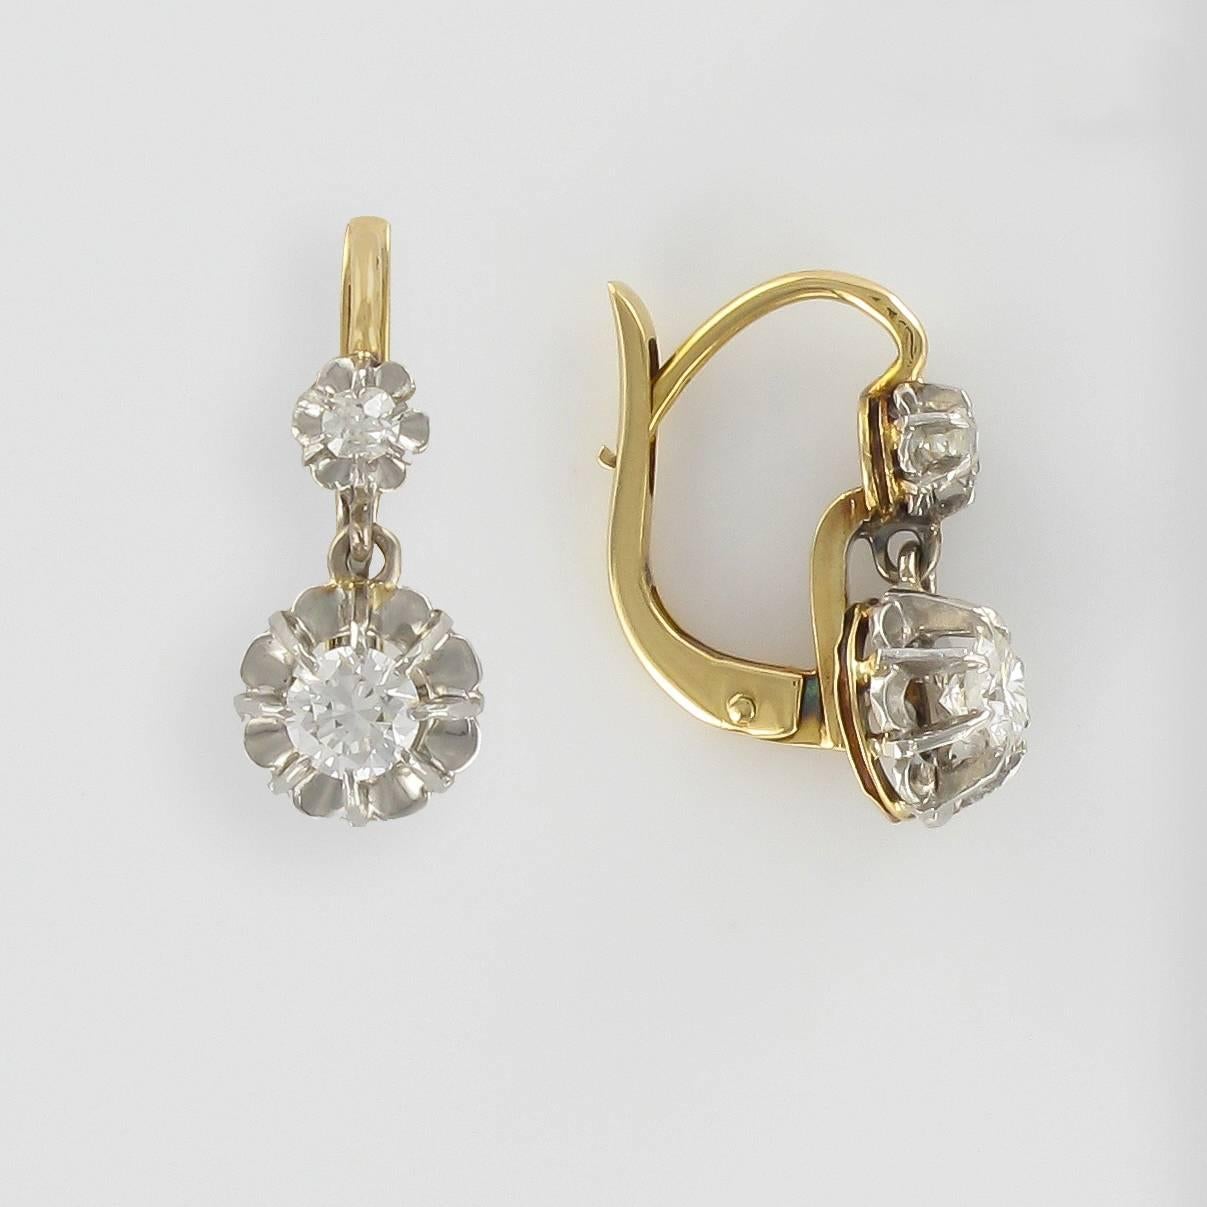 For pierced ears.
Pairs of earrings in 18 carat white and yellow gold, eagle head hallmark. 

Each diamond earring features a claw set cushion cut diamond from which is suspended a much larger cushion cut diamond in an illusional setting. The clasp